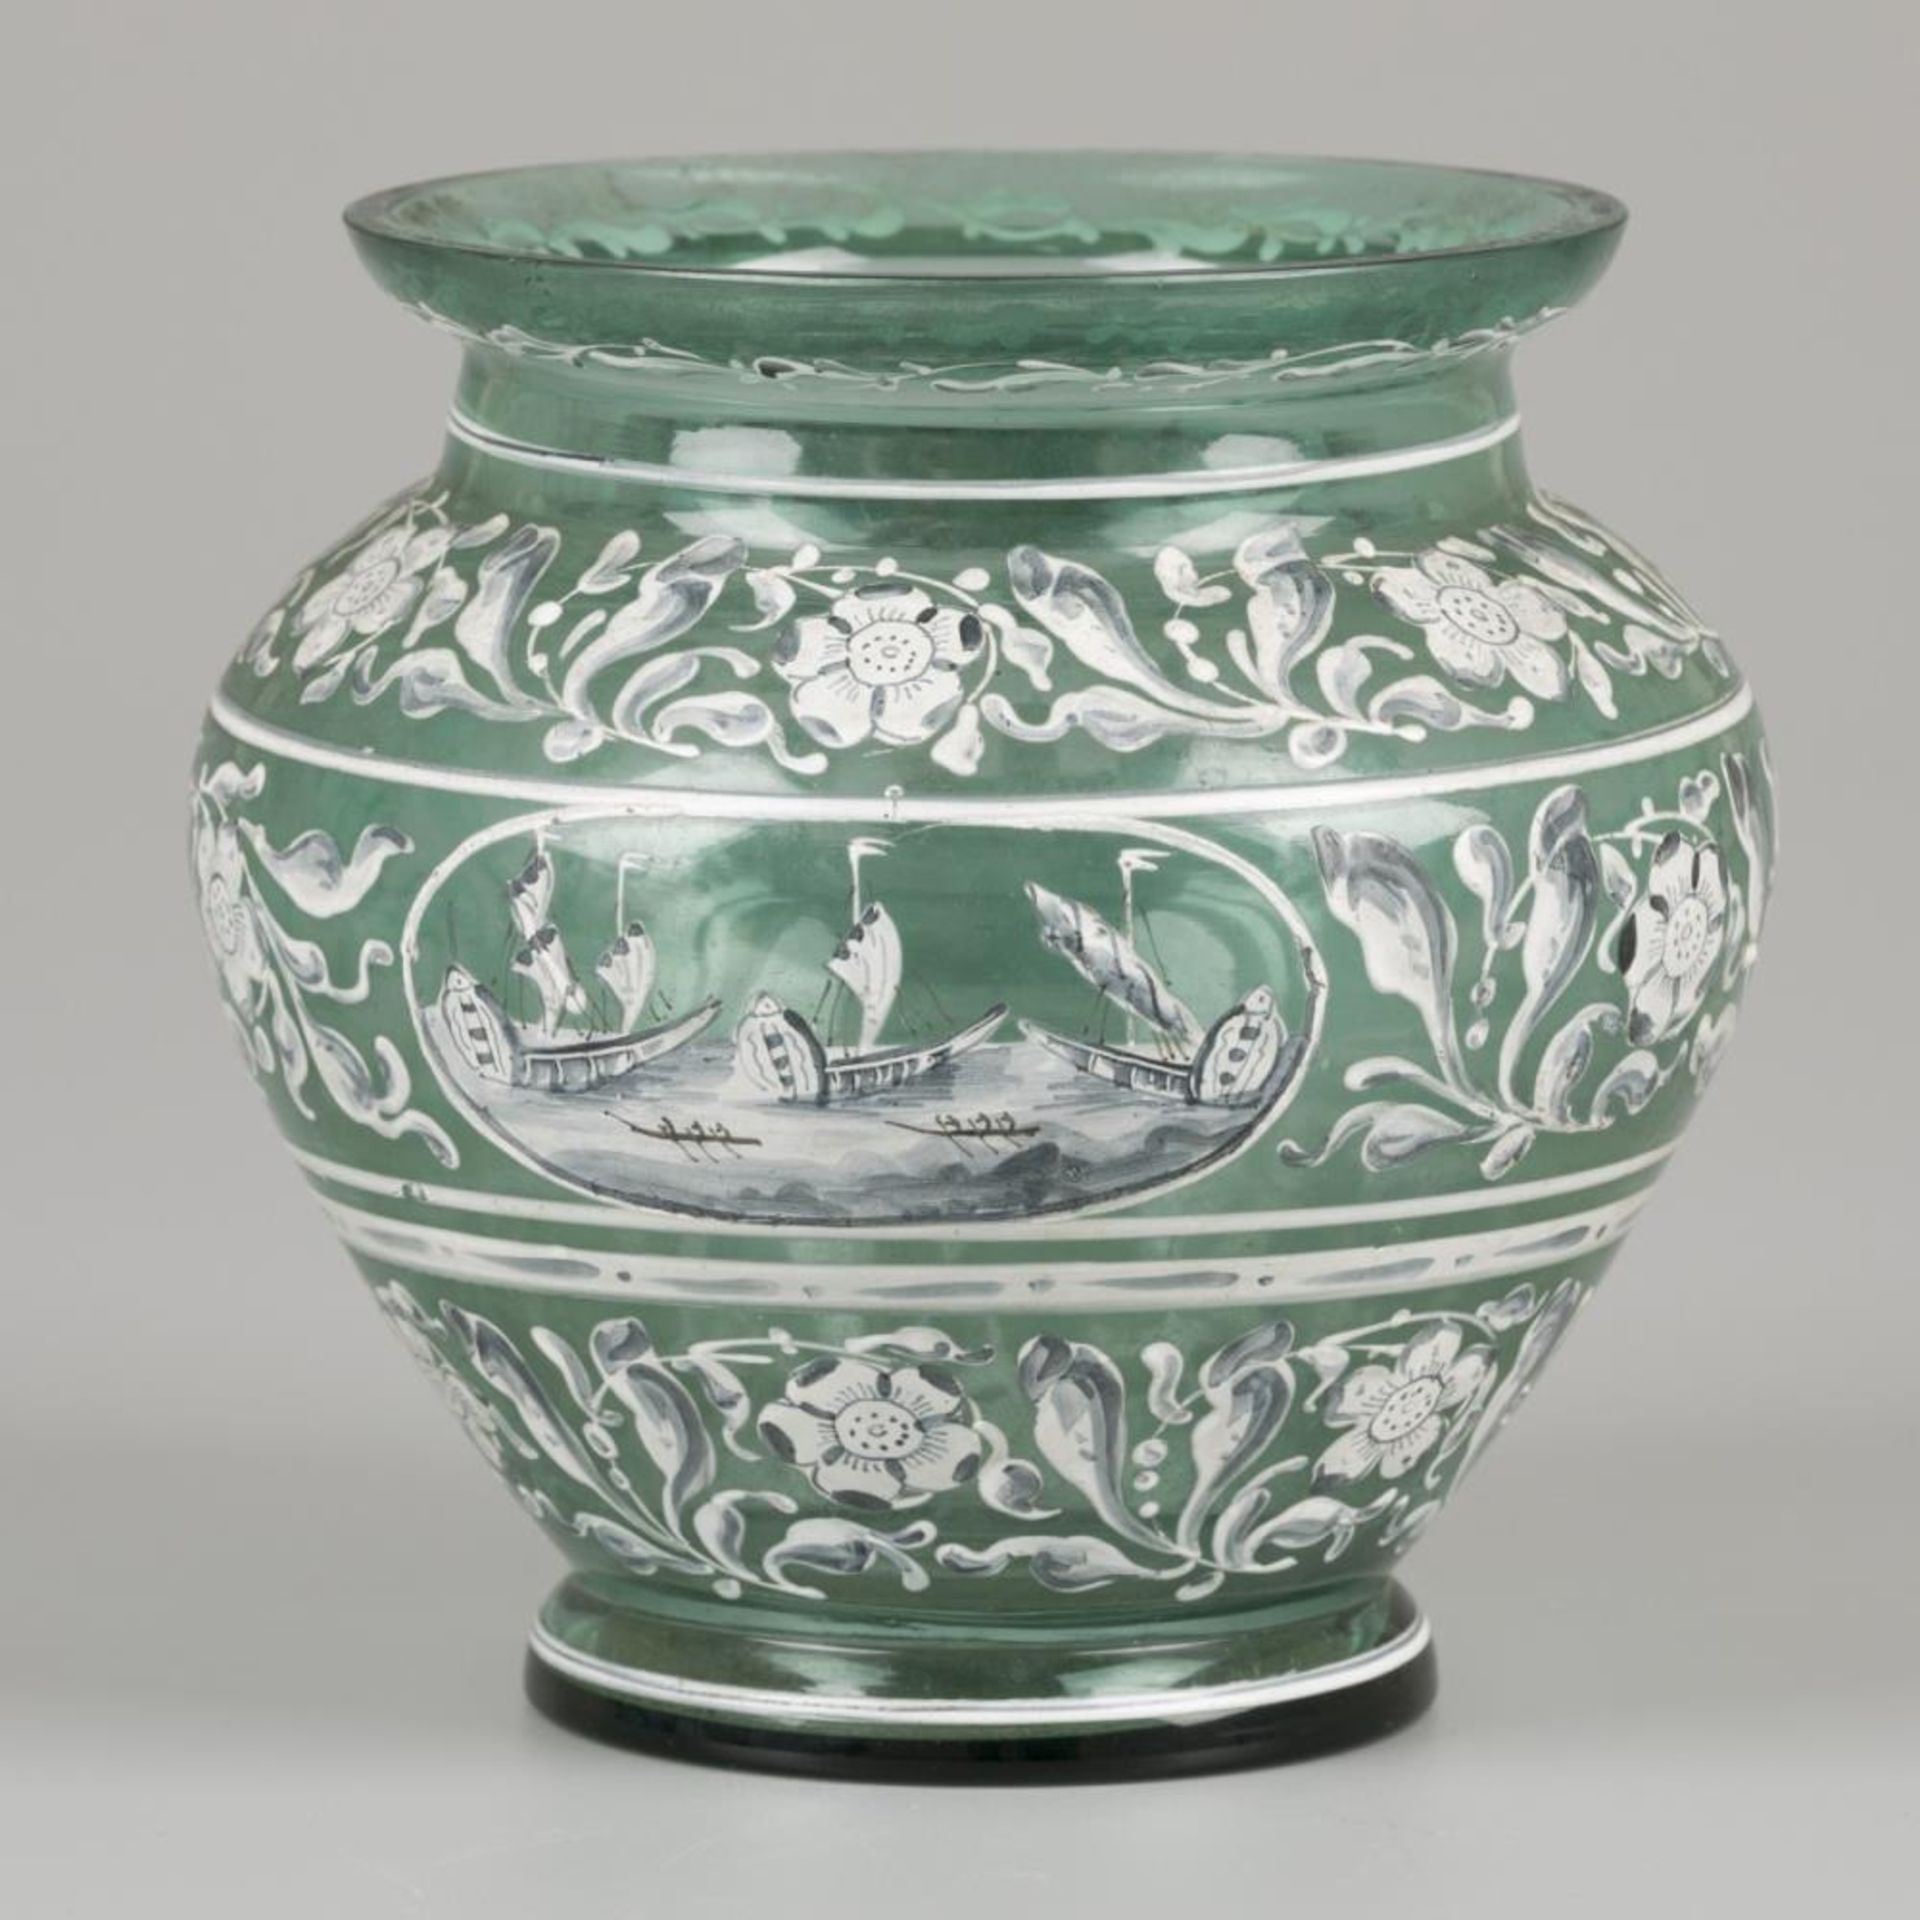 A glass vase with enamelled motif, Italy, 19th century. - Image 4 of 7